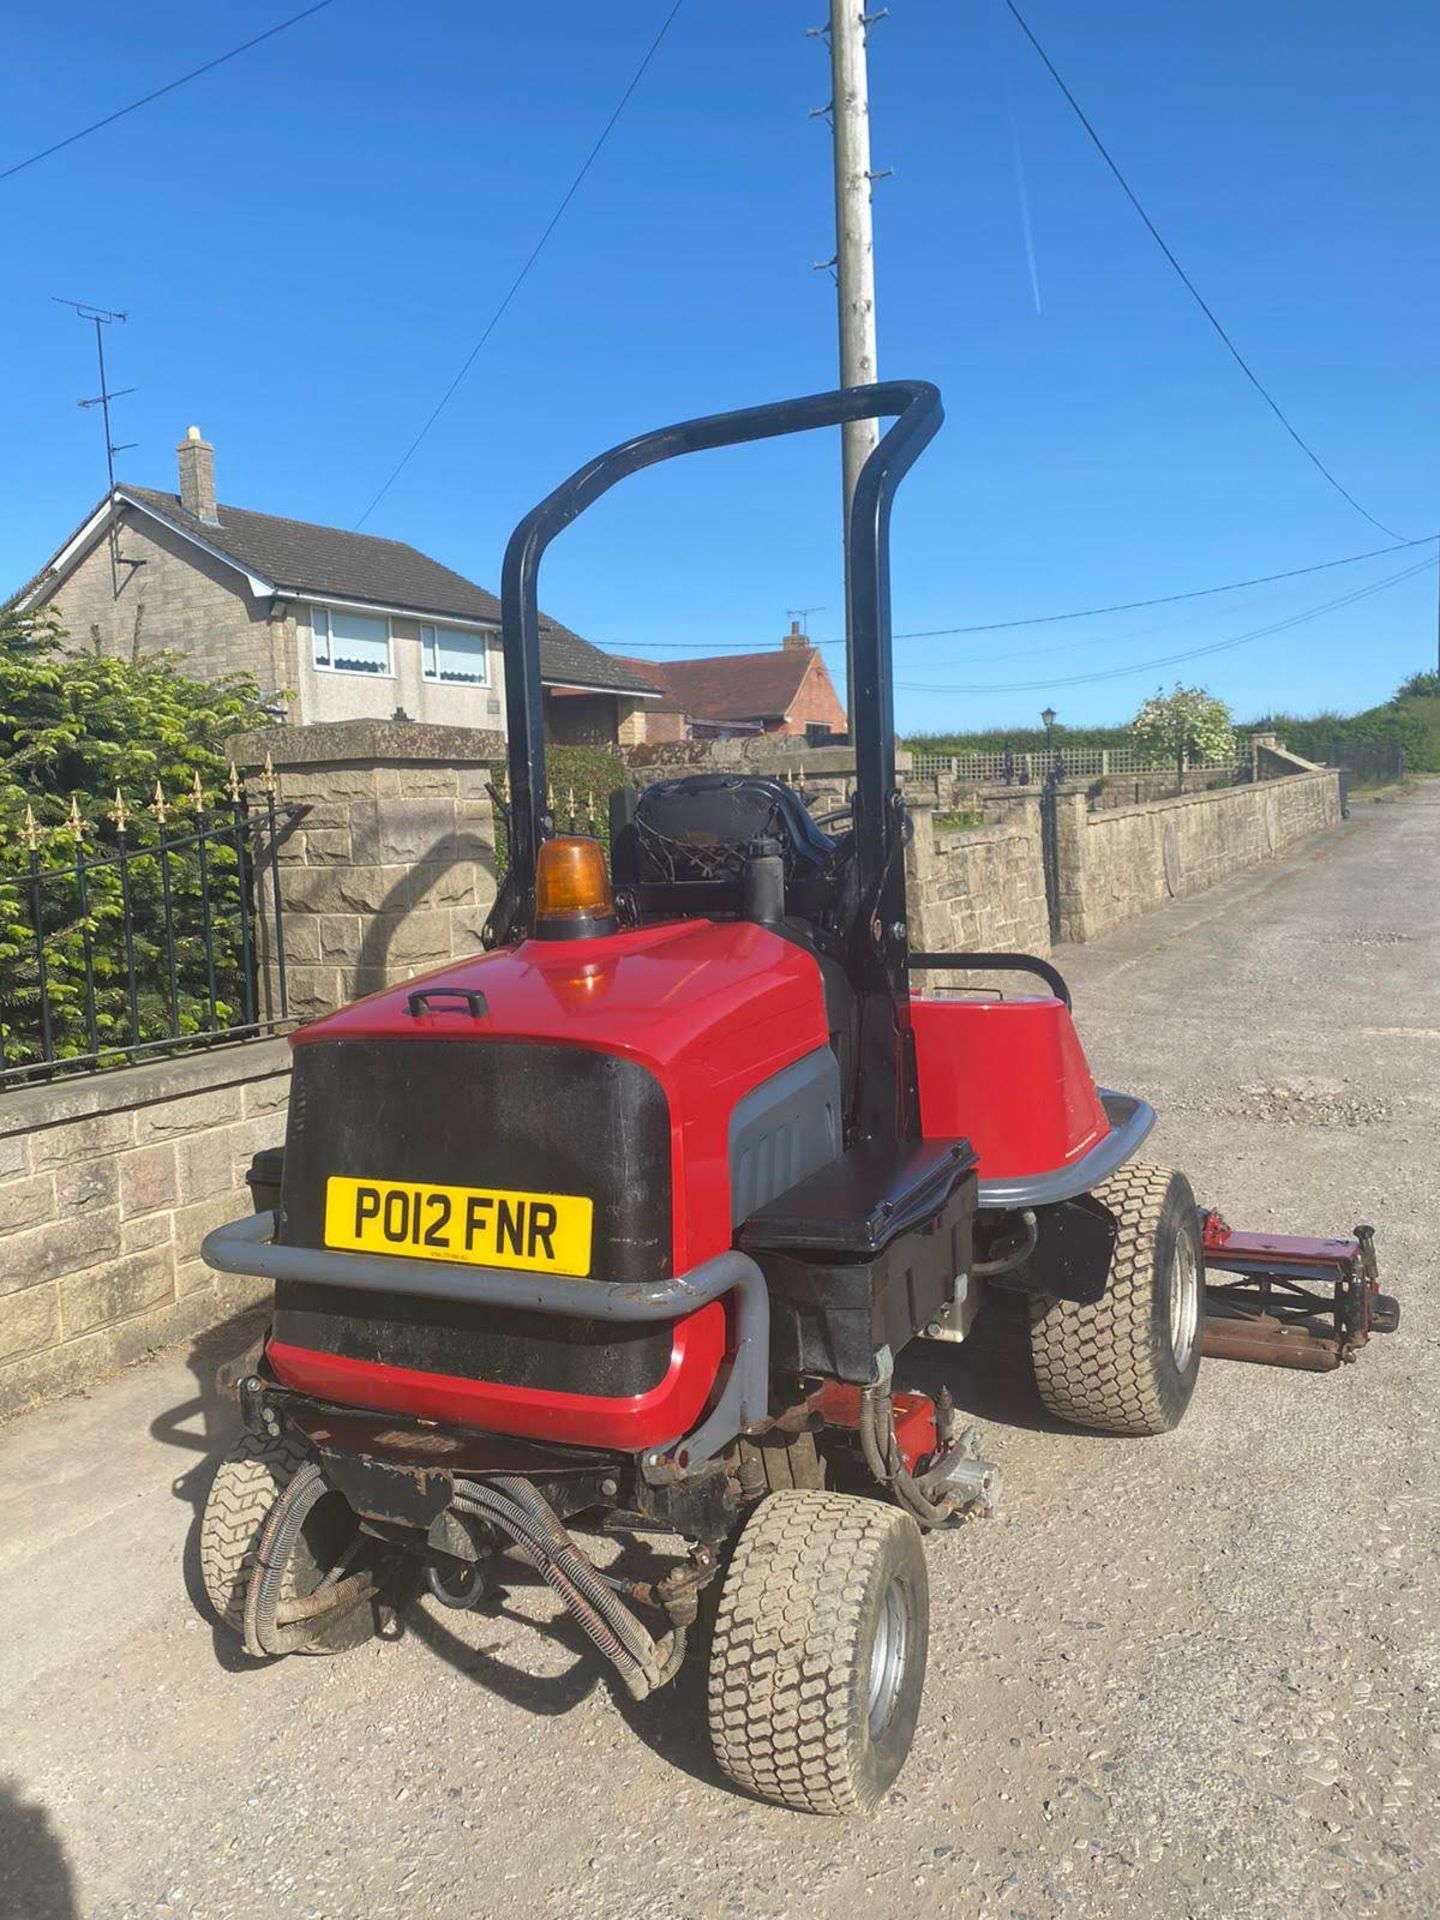 2012 TORO LT3240 RIDE ON LAWN MOWER, LOW HOURS - ONLY 1700, 4 WHEEL DRIVE, IN GOOD CONDITION - Image 4 of 9